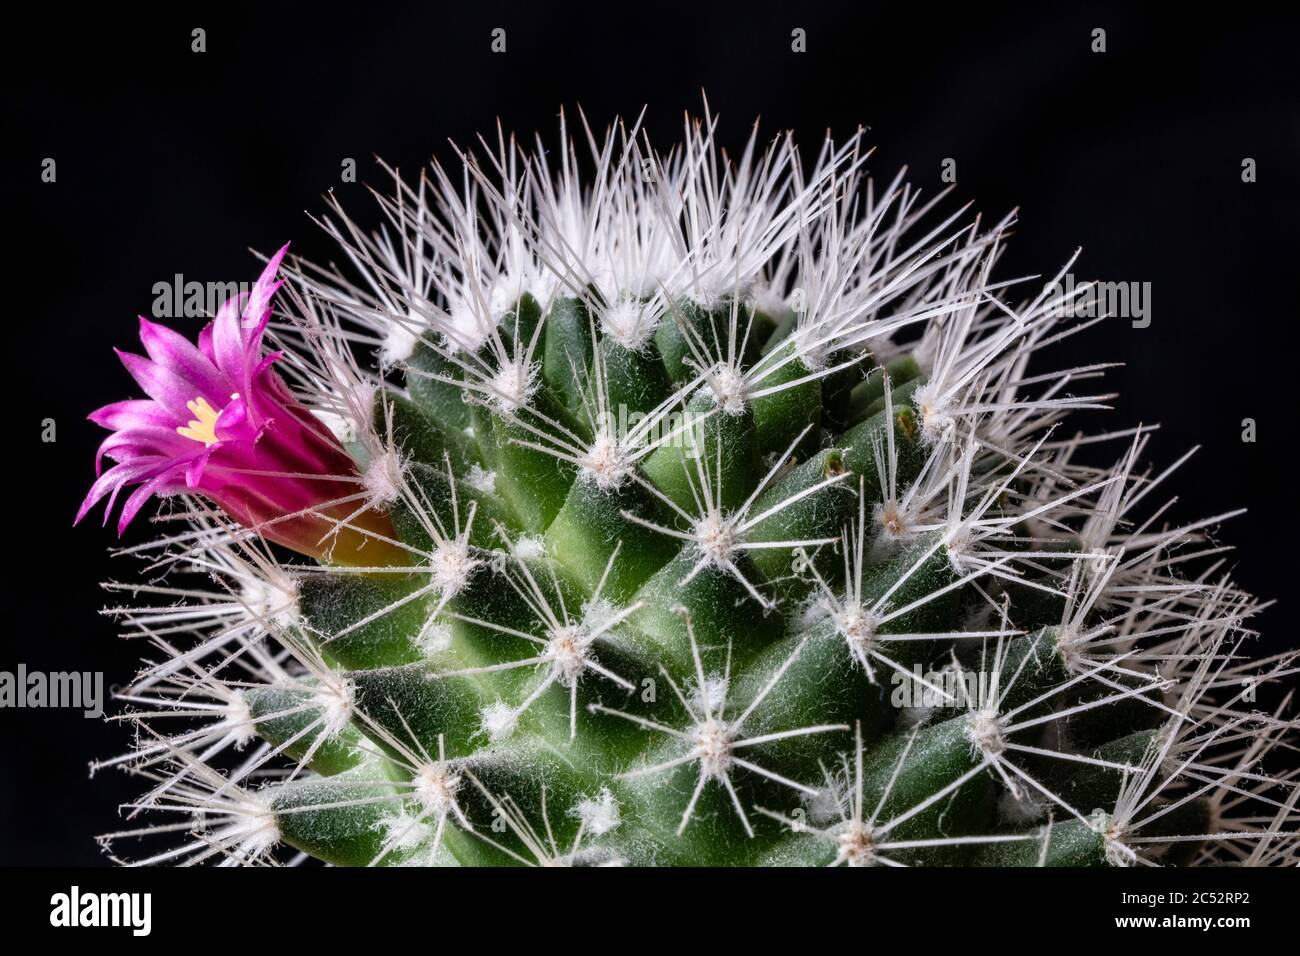 Pink flower on a cactus plant photographed against a black background Stock Photo